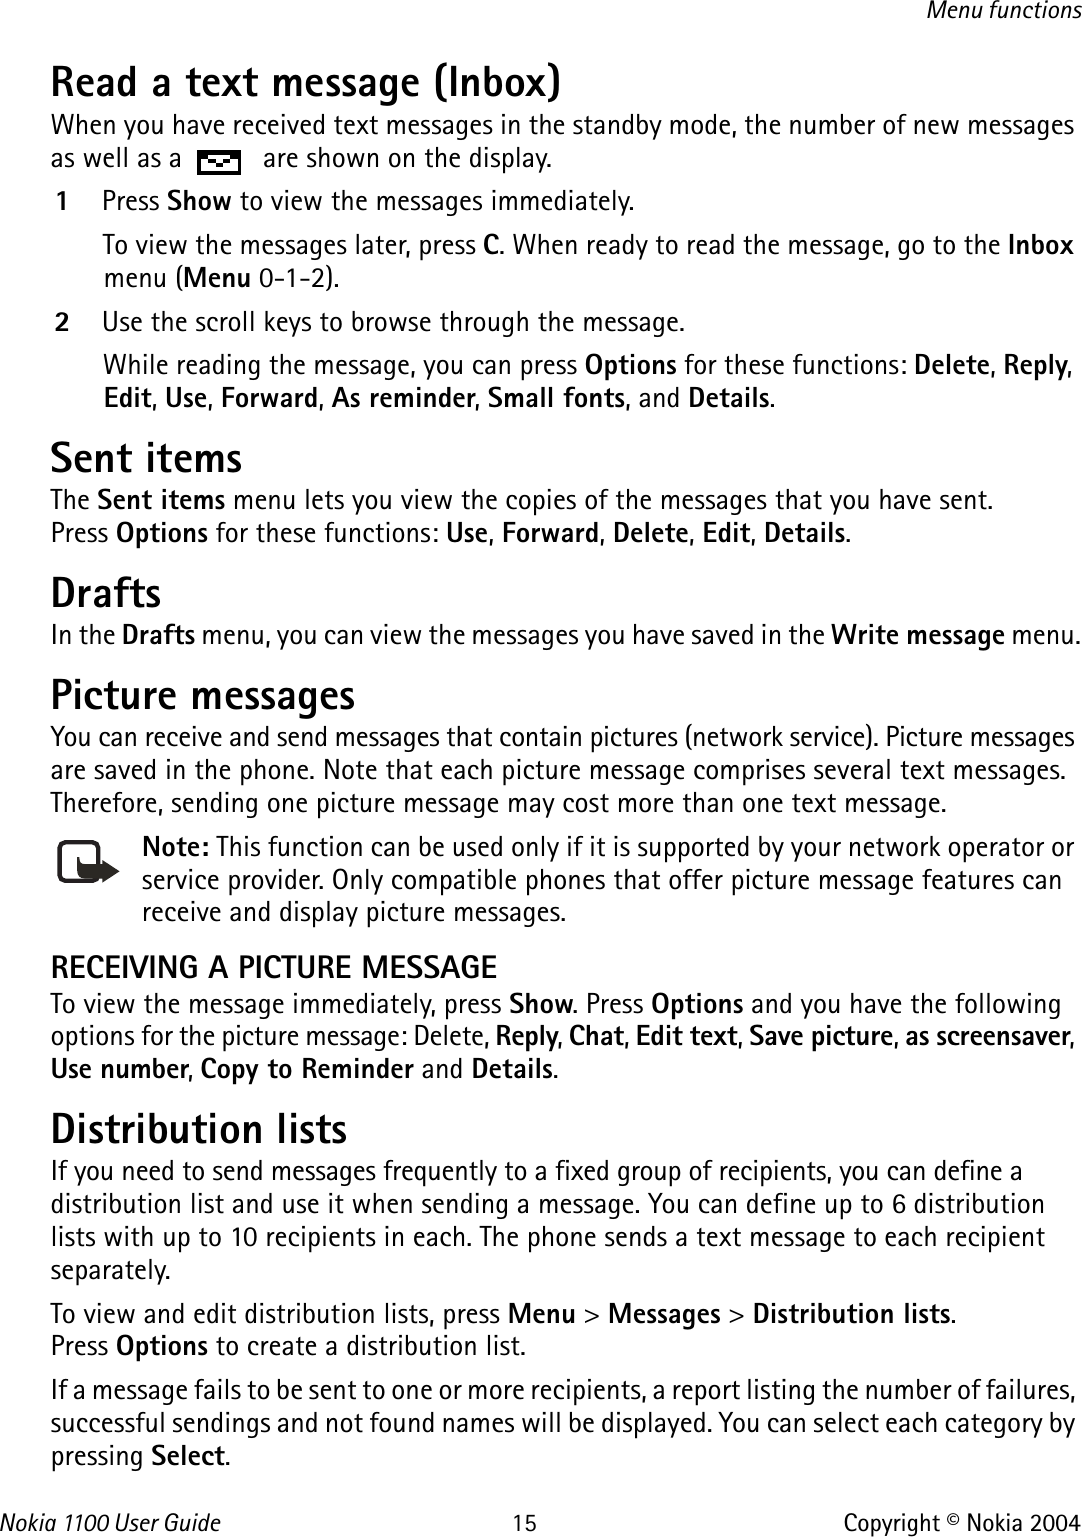 Nokia 110 0  User Guide 15 Copyright © Nokia 2004Menu functionsRead a text message (Inbox)When you have received text messages in the standby mode, the number of new messages as well as a   are shown on the display.1Press Show to view the messages immediately.To view the messages later, press C. When ready to read the message, go to the Inbox menu (Menu 0-1-2).2Use the scroll keys to browse through the message.While reading the message, you can press Options for these functions: Delete, Reply, Edit, Use, Forward, As reminder, Small fonts, and Details.Sent itemsThe Sent items menu lets you view the copies of the messages that you have sent. Press Options for these functions: Use, Forward, Delete, Edit, Details.DraftsIn the Drafts menu, you can view the messages you have saved in the Write message menu.Picture messages You can receive and send messages that contain pictures (network service). Picture messages are saved in the phone. Note that each picture message comprises several text messages. Therefore, sending one picture message may cost more than one text message.Note: This function can be used only if it is supported by your network operator or service provider. Only compatible phones that offer picture message features can receive and display picture messages.RECEIVING A PICTURE MESSAGETo view the message immediately, press Show. Press Options and you have the following options for the picture message: Delete, Reply, Chat, Edit text, Save picture, as screensaver, Use number, Copy to Reminder and Details.Distribution listsIf you need to send messages frequently to a fixed group of recipients, you can define a distribution list and use it when sending a message. You can define up to 6 distribution lists with up to 10 recipients in each. The phone sends a text message to each recipient separately.To view and edit distribution lists, press Menu &gt; Messages &gt; Distribution lists. Press Options to create a distribution list.If a message fails to be sent to one or more recipients, a report listing the number of failures, successful sendings and not found names will be displayed. You can select each category by pressing Select.